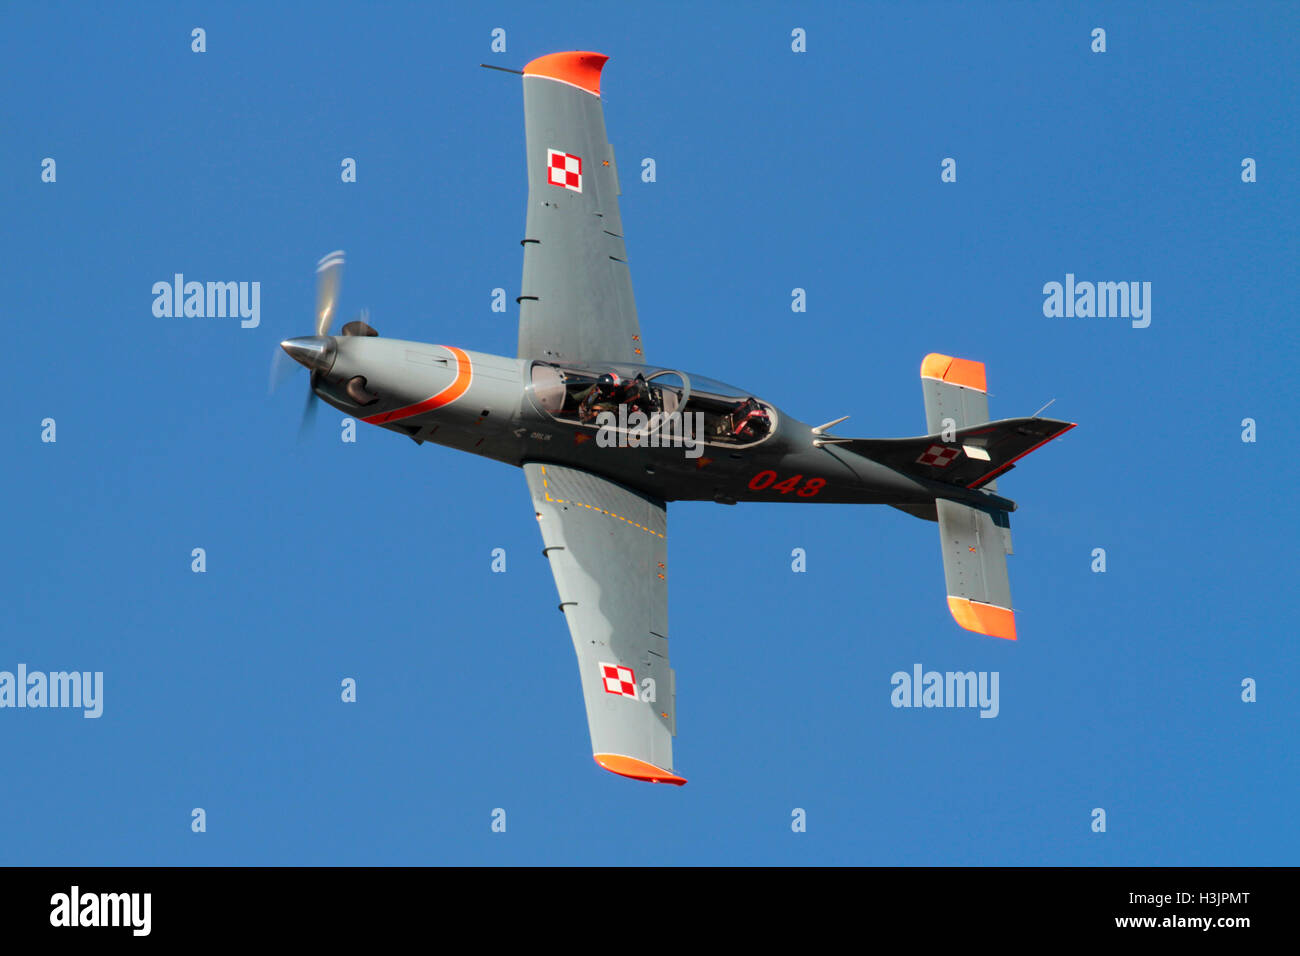 Military aircraft. Polish Air Force PZL-130 Orlik single engine propeller powered trainer plane flying in a blue sky at an air display Stock Photo